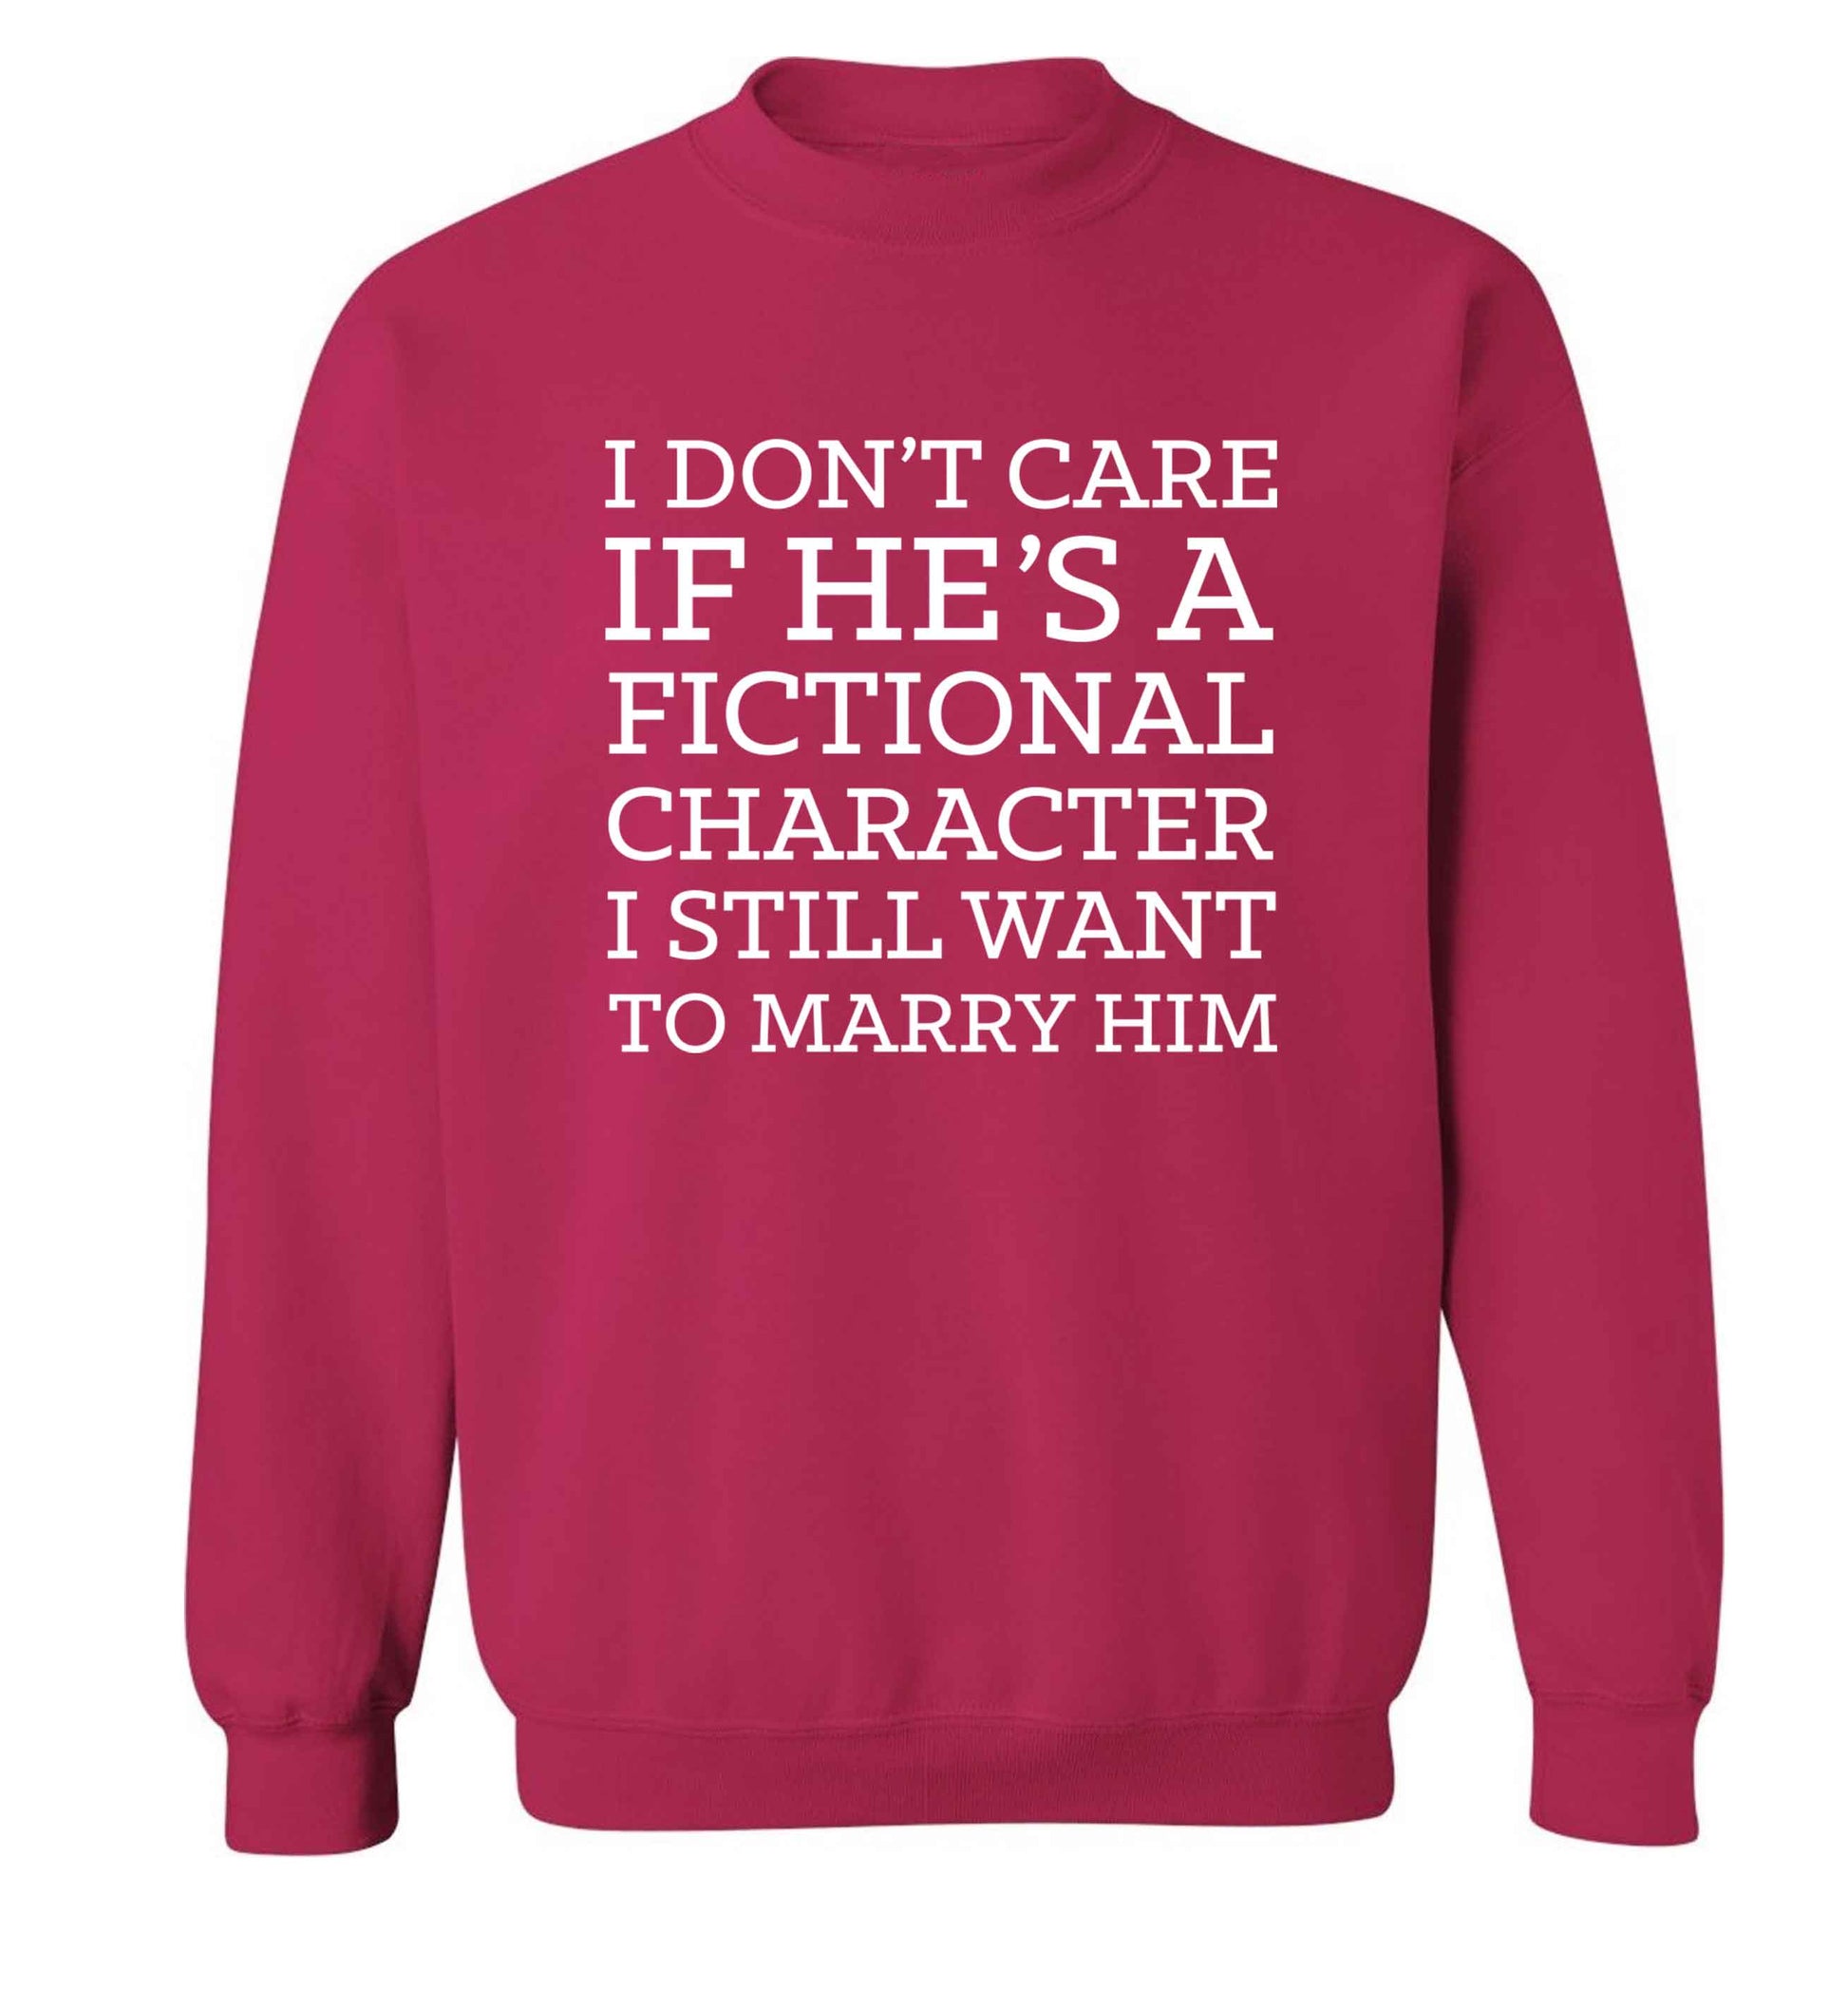 I don't care if he's a fictional character I still want to marry him adult's unisex pink sweater 2XL